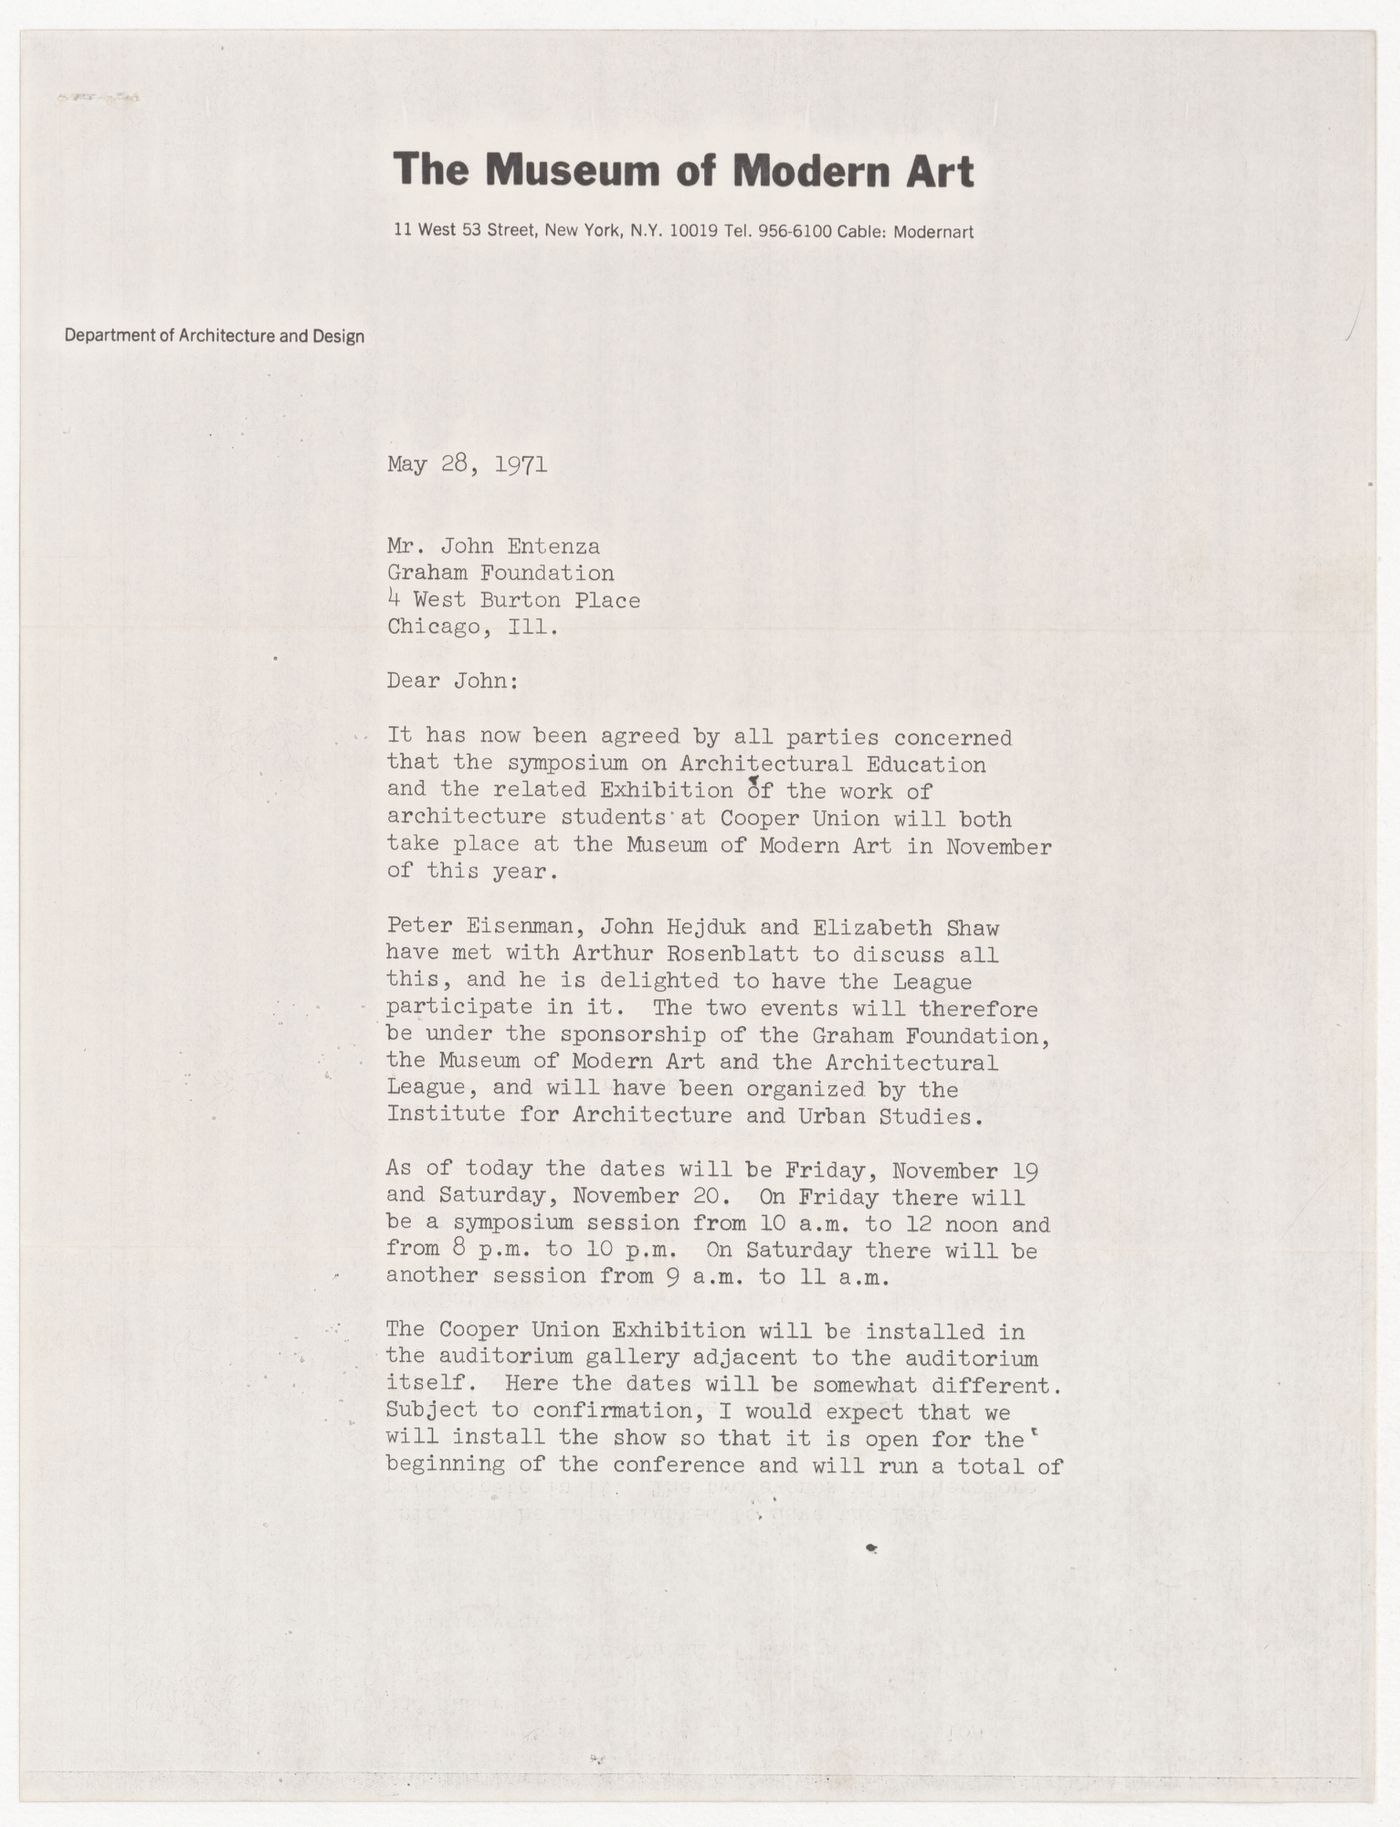 Letter from Arthur Drexler to John Entenza about sponsorship of symposium at The Museum of Modern Art (MOMA)